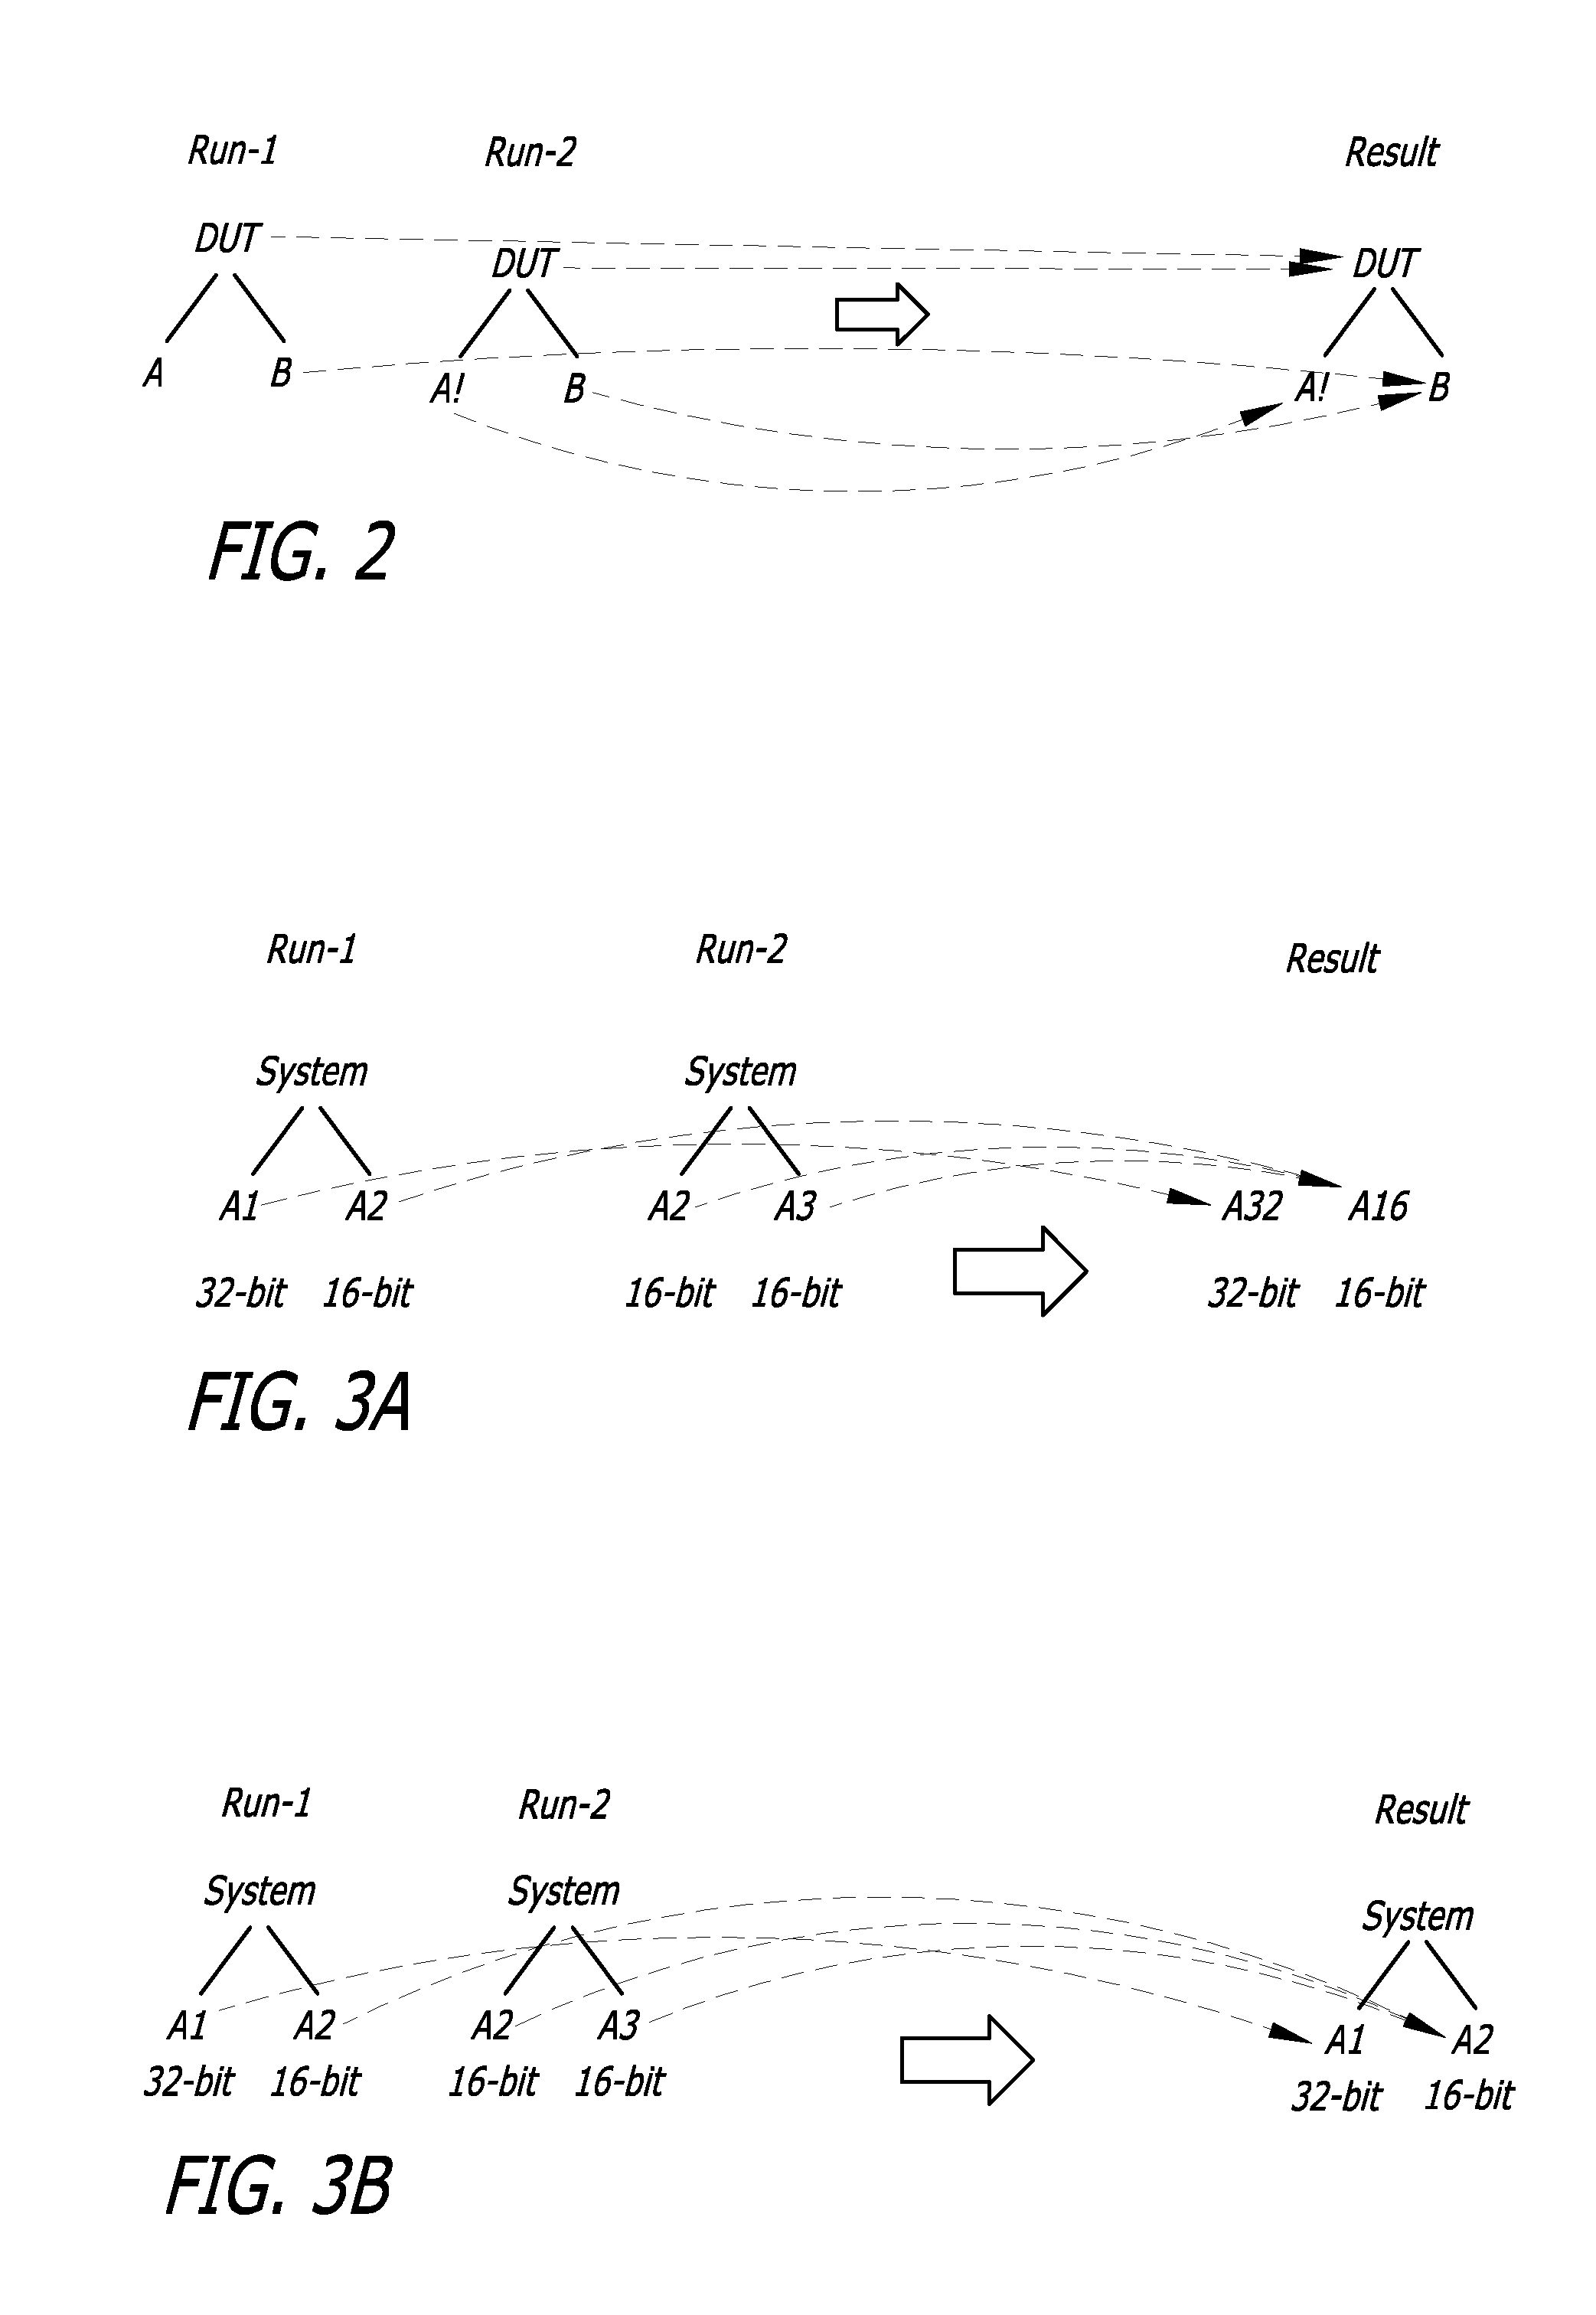 Configuration-based merging of coverage data results for functional verification of integrated circuits